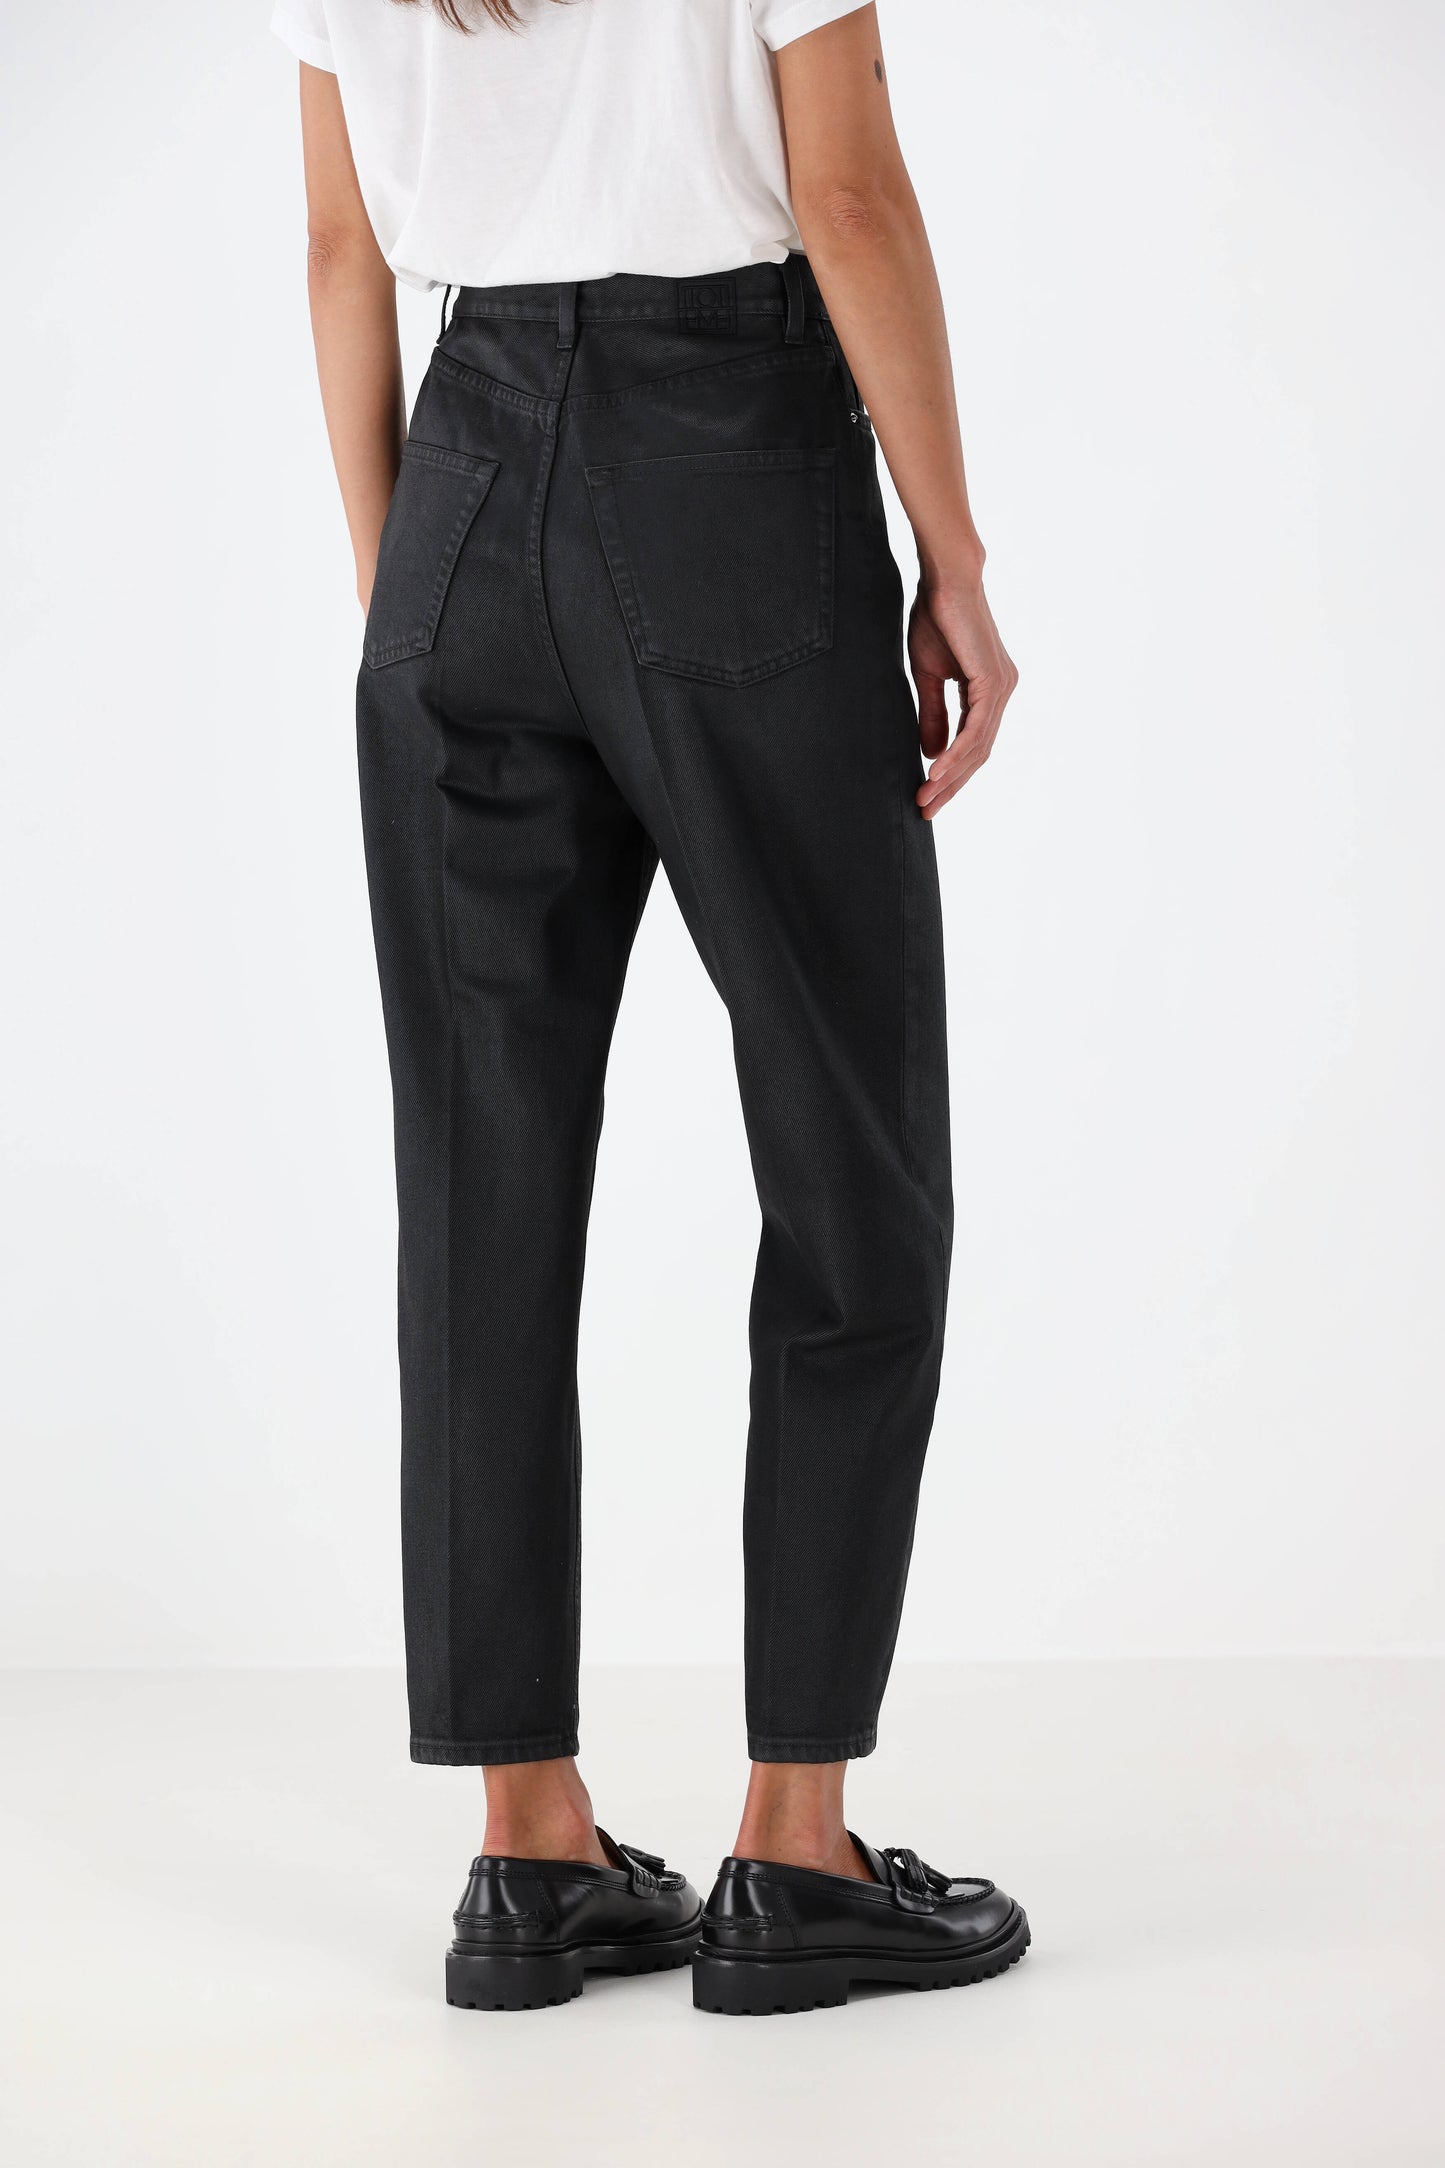 Jeans Tapered in Coated BlackToteme - Anita Hass